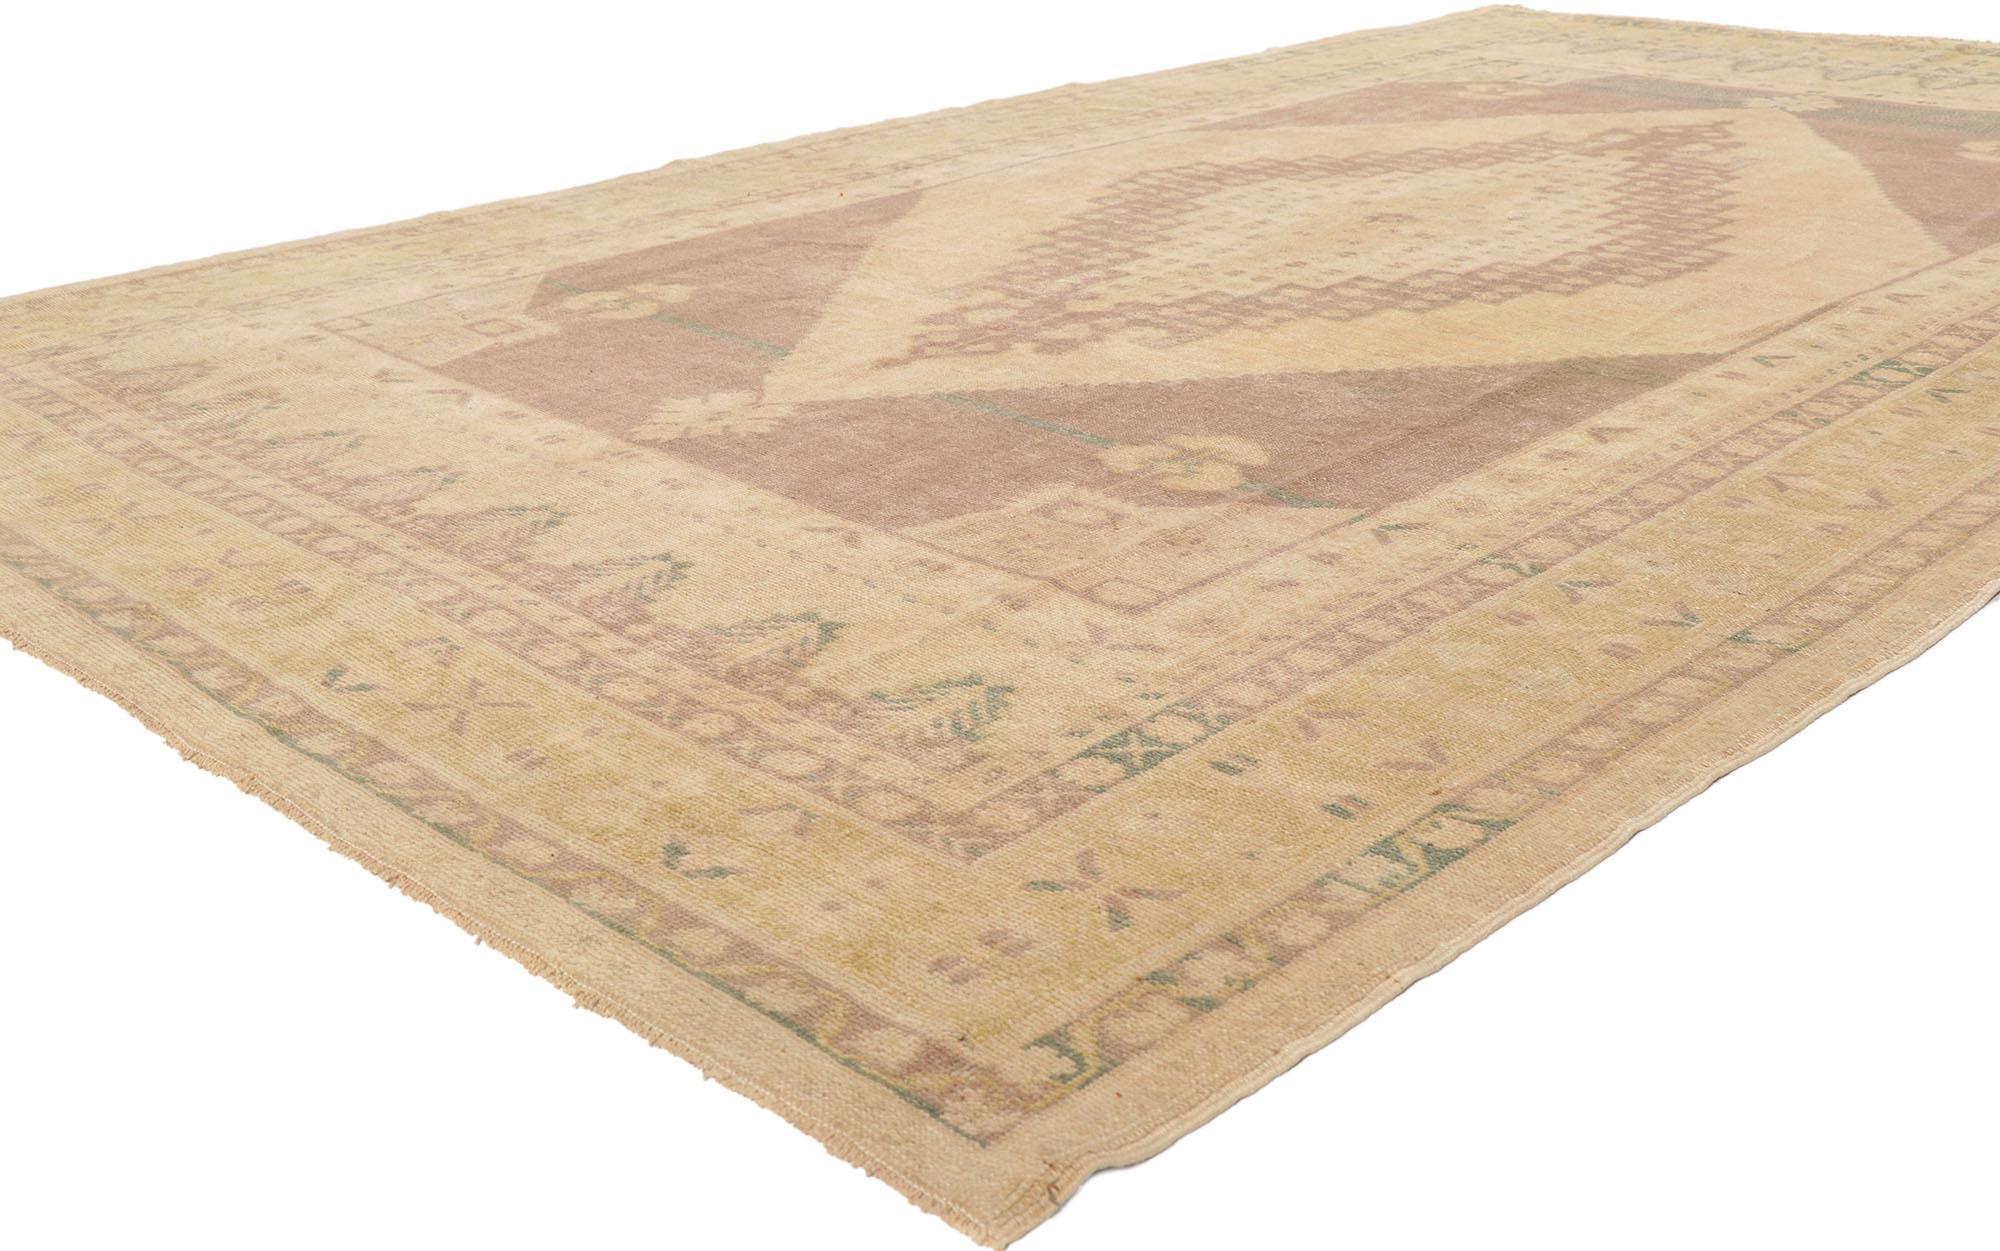 53683 Vintage Turkish Oushak Rug with Earth-Tone Colors, 06'04 x 10'06. Emulating timeless style with incredible detail and texture, this hand knotted wool vintage Turkish Oushak rug is a captivating vision of woven beauty. The intricate floral